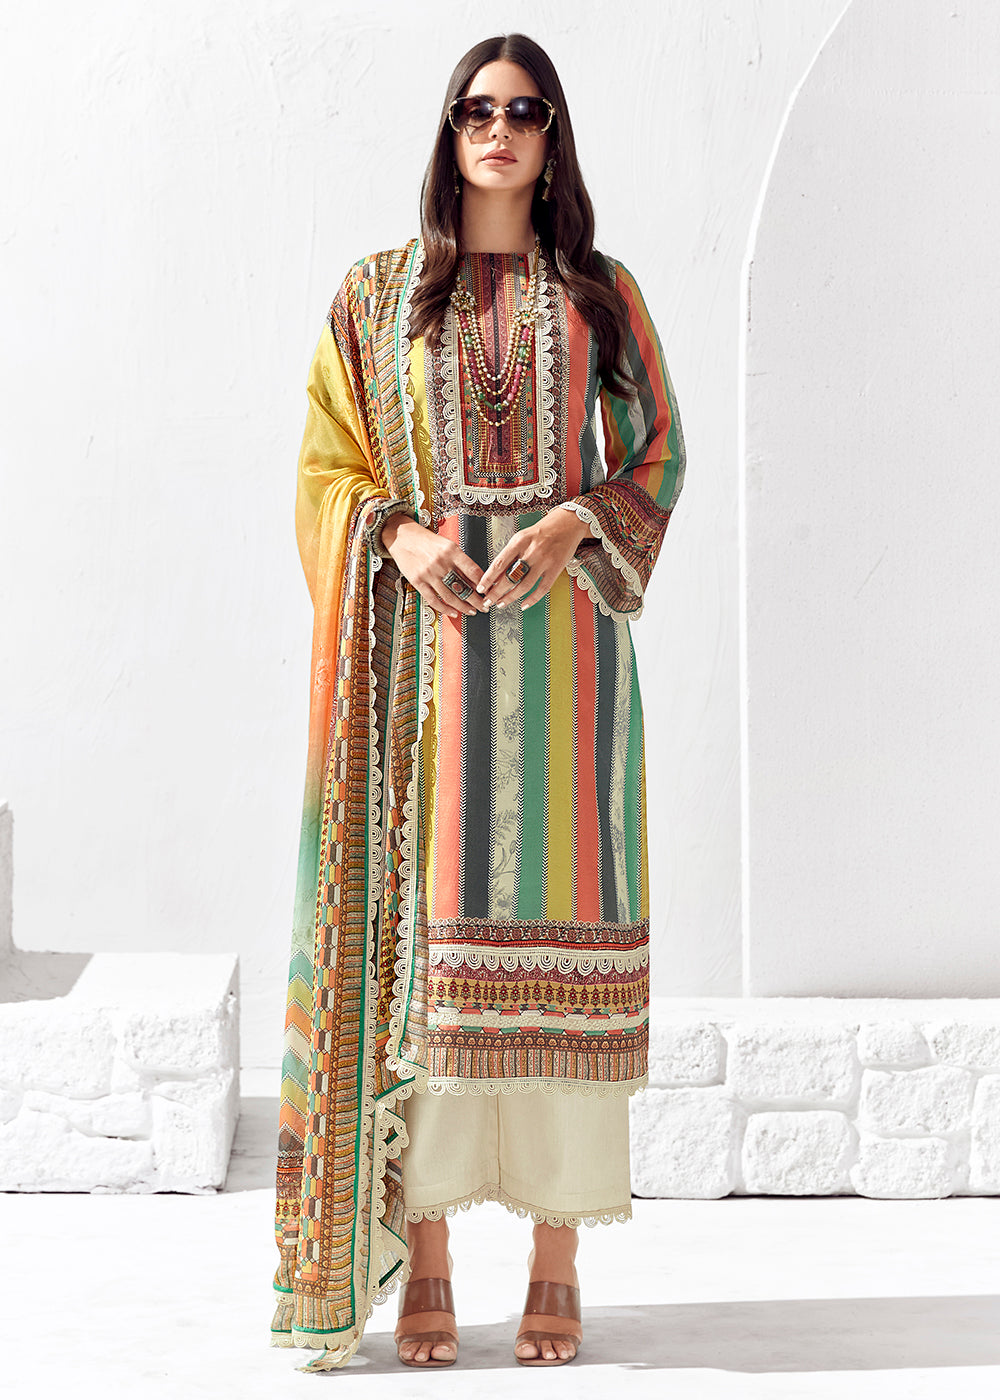 Buy Now White Multicolor Cotton Lawn Digital Printed Salwar Suit Online in USA, UK, Canada, Germany, Australia & Worldwide at Empress Clothing. 